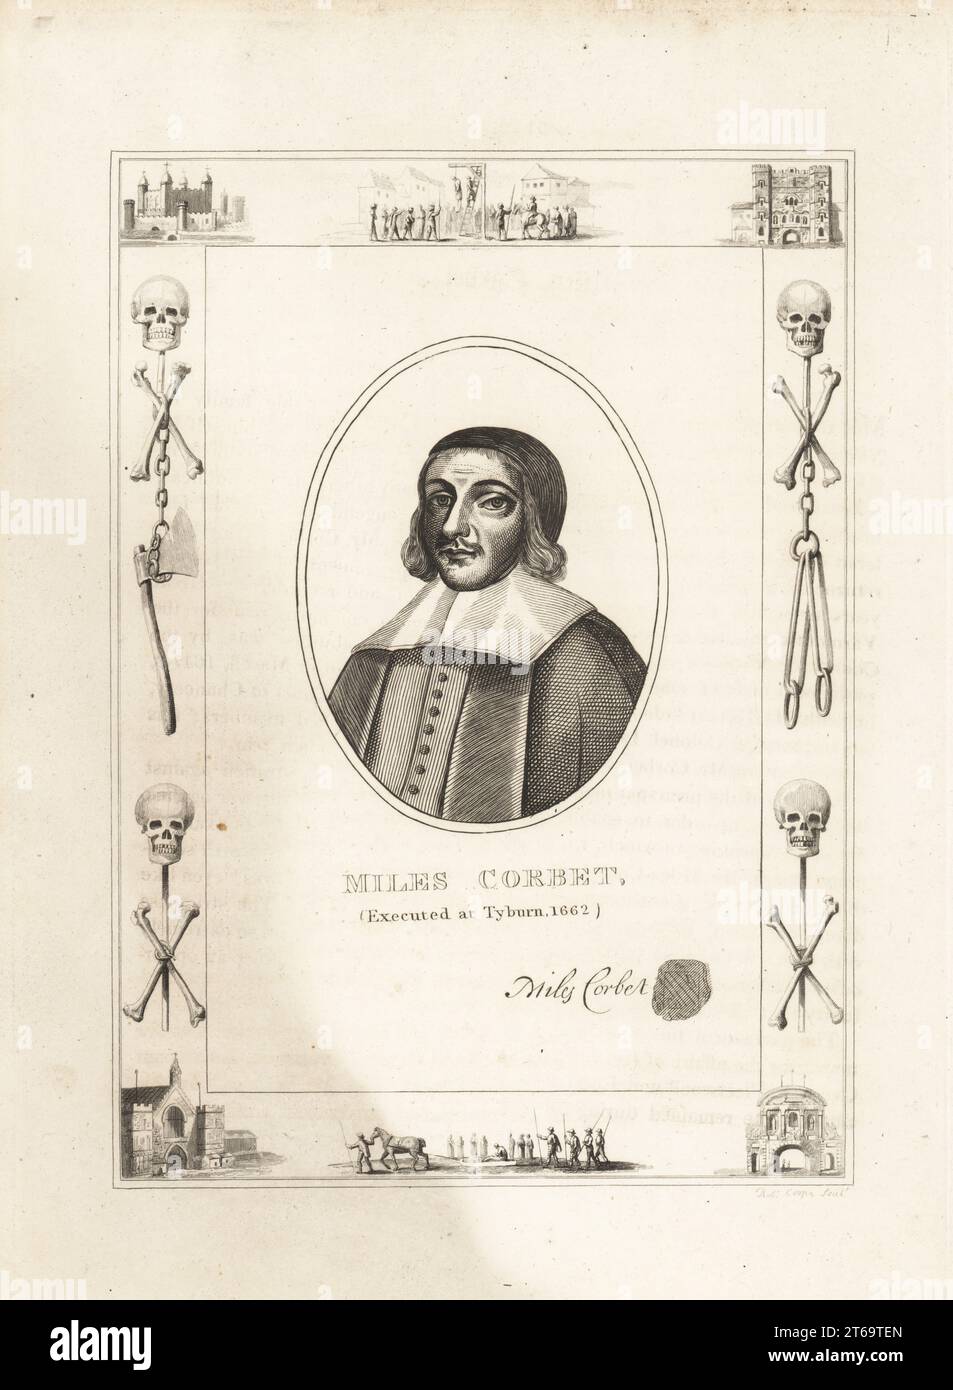 Miles Corbet, executed at Tyburn. English politician, parliamentarian and regicide of King Charles I. Tried, hanged, drawn and quartered on 19 April 1662. With his autograph and seal. Within a frame decorated with vignettes of skull and cross bones, chains and executioners axe, a man hanging from a gibbet at Tyburn, a condemned man on a sled, the Tower of London, Newgate Prison. Copperplate engraving by Robert Cooper from James Caulfields The High Court of Justice, London, 1820. Stock Photo